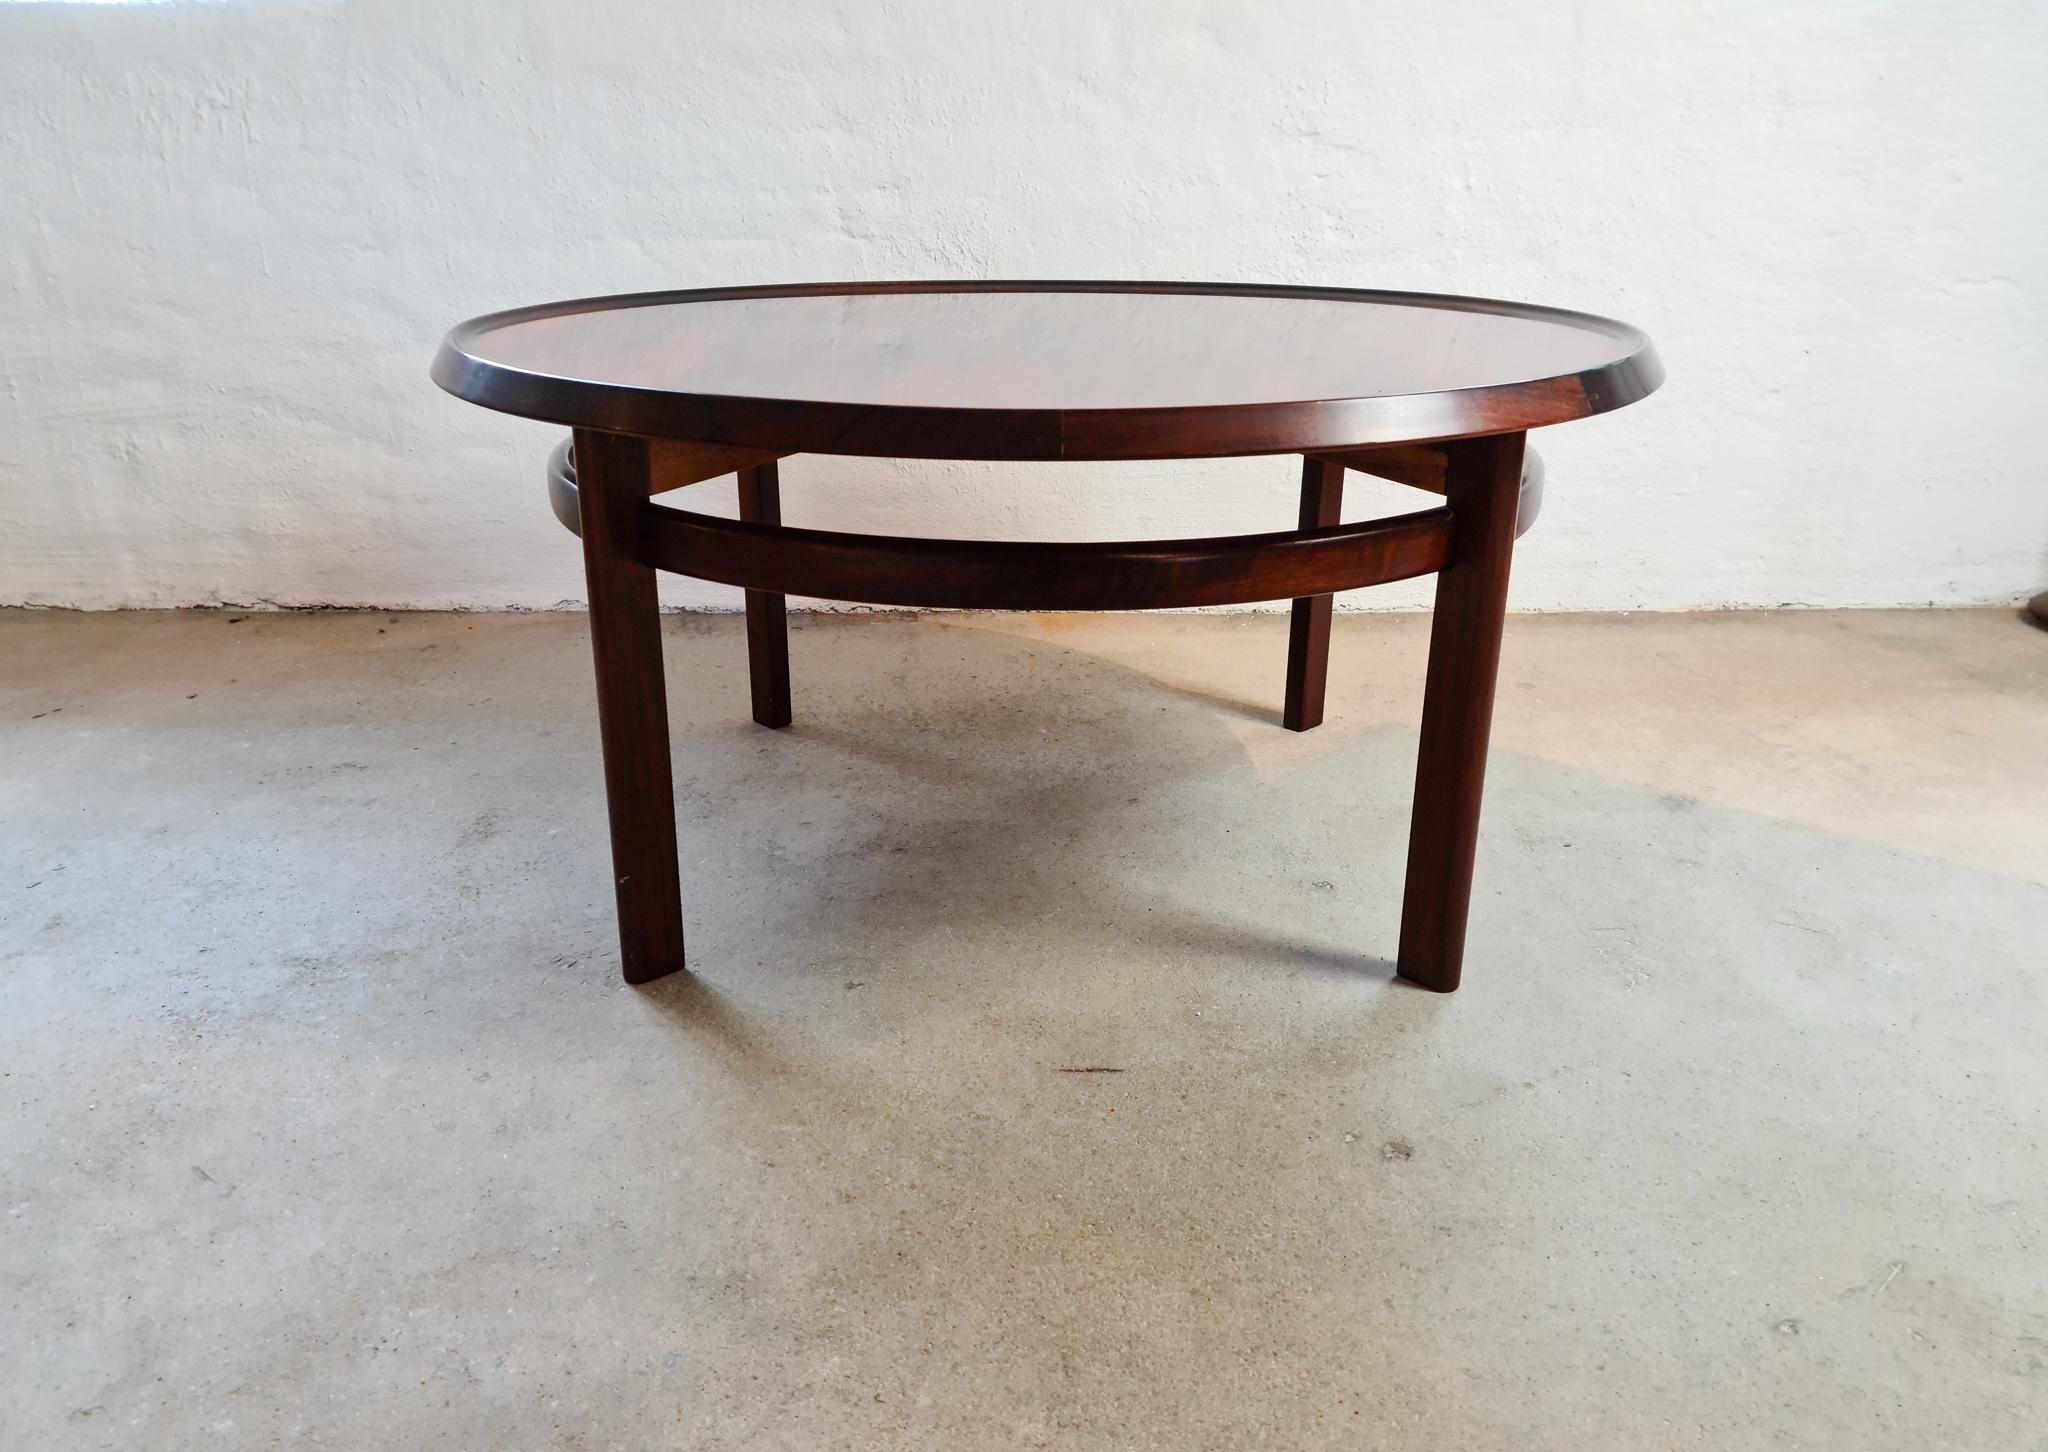 This coffee table of very high quality was produced at Haug Sneekeri AB Norway for Bruksbo Tegnekontor. The well-known architect Torbjörn Afdal was the designer. He made this round coffee table into perfection. Made in Brazilian Rosewood this table